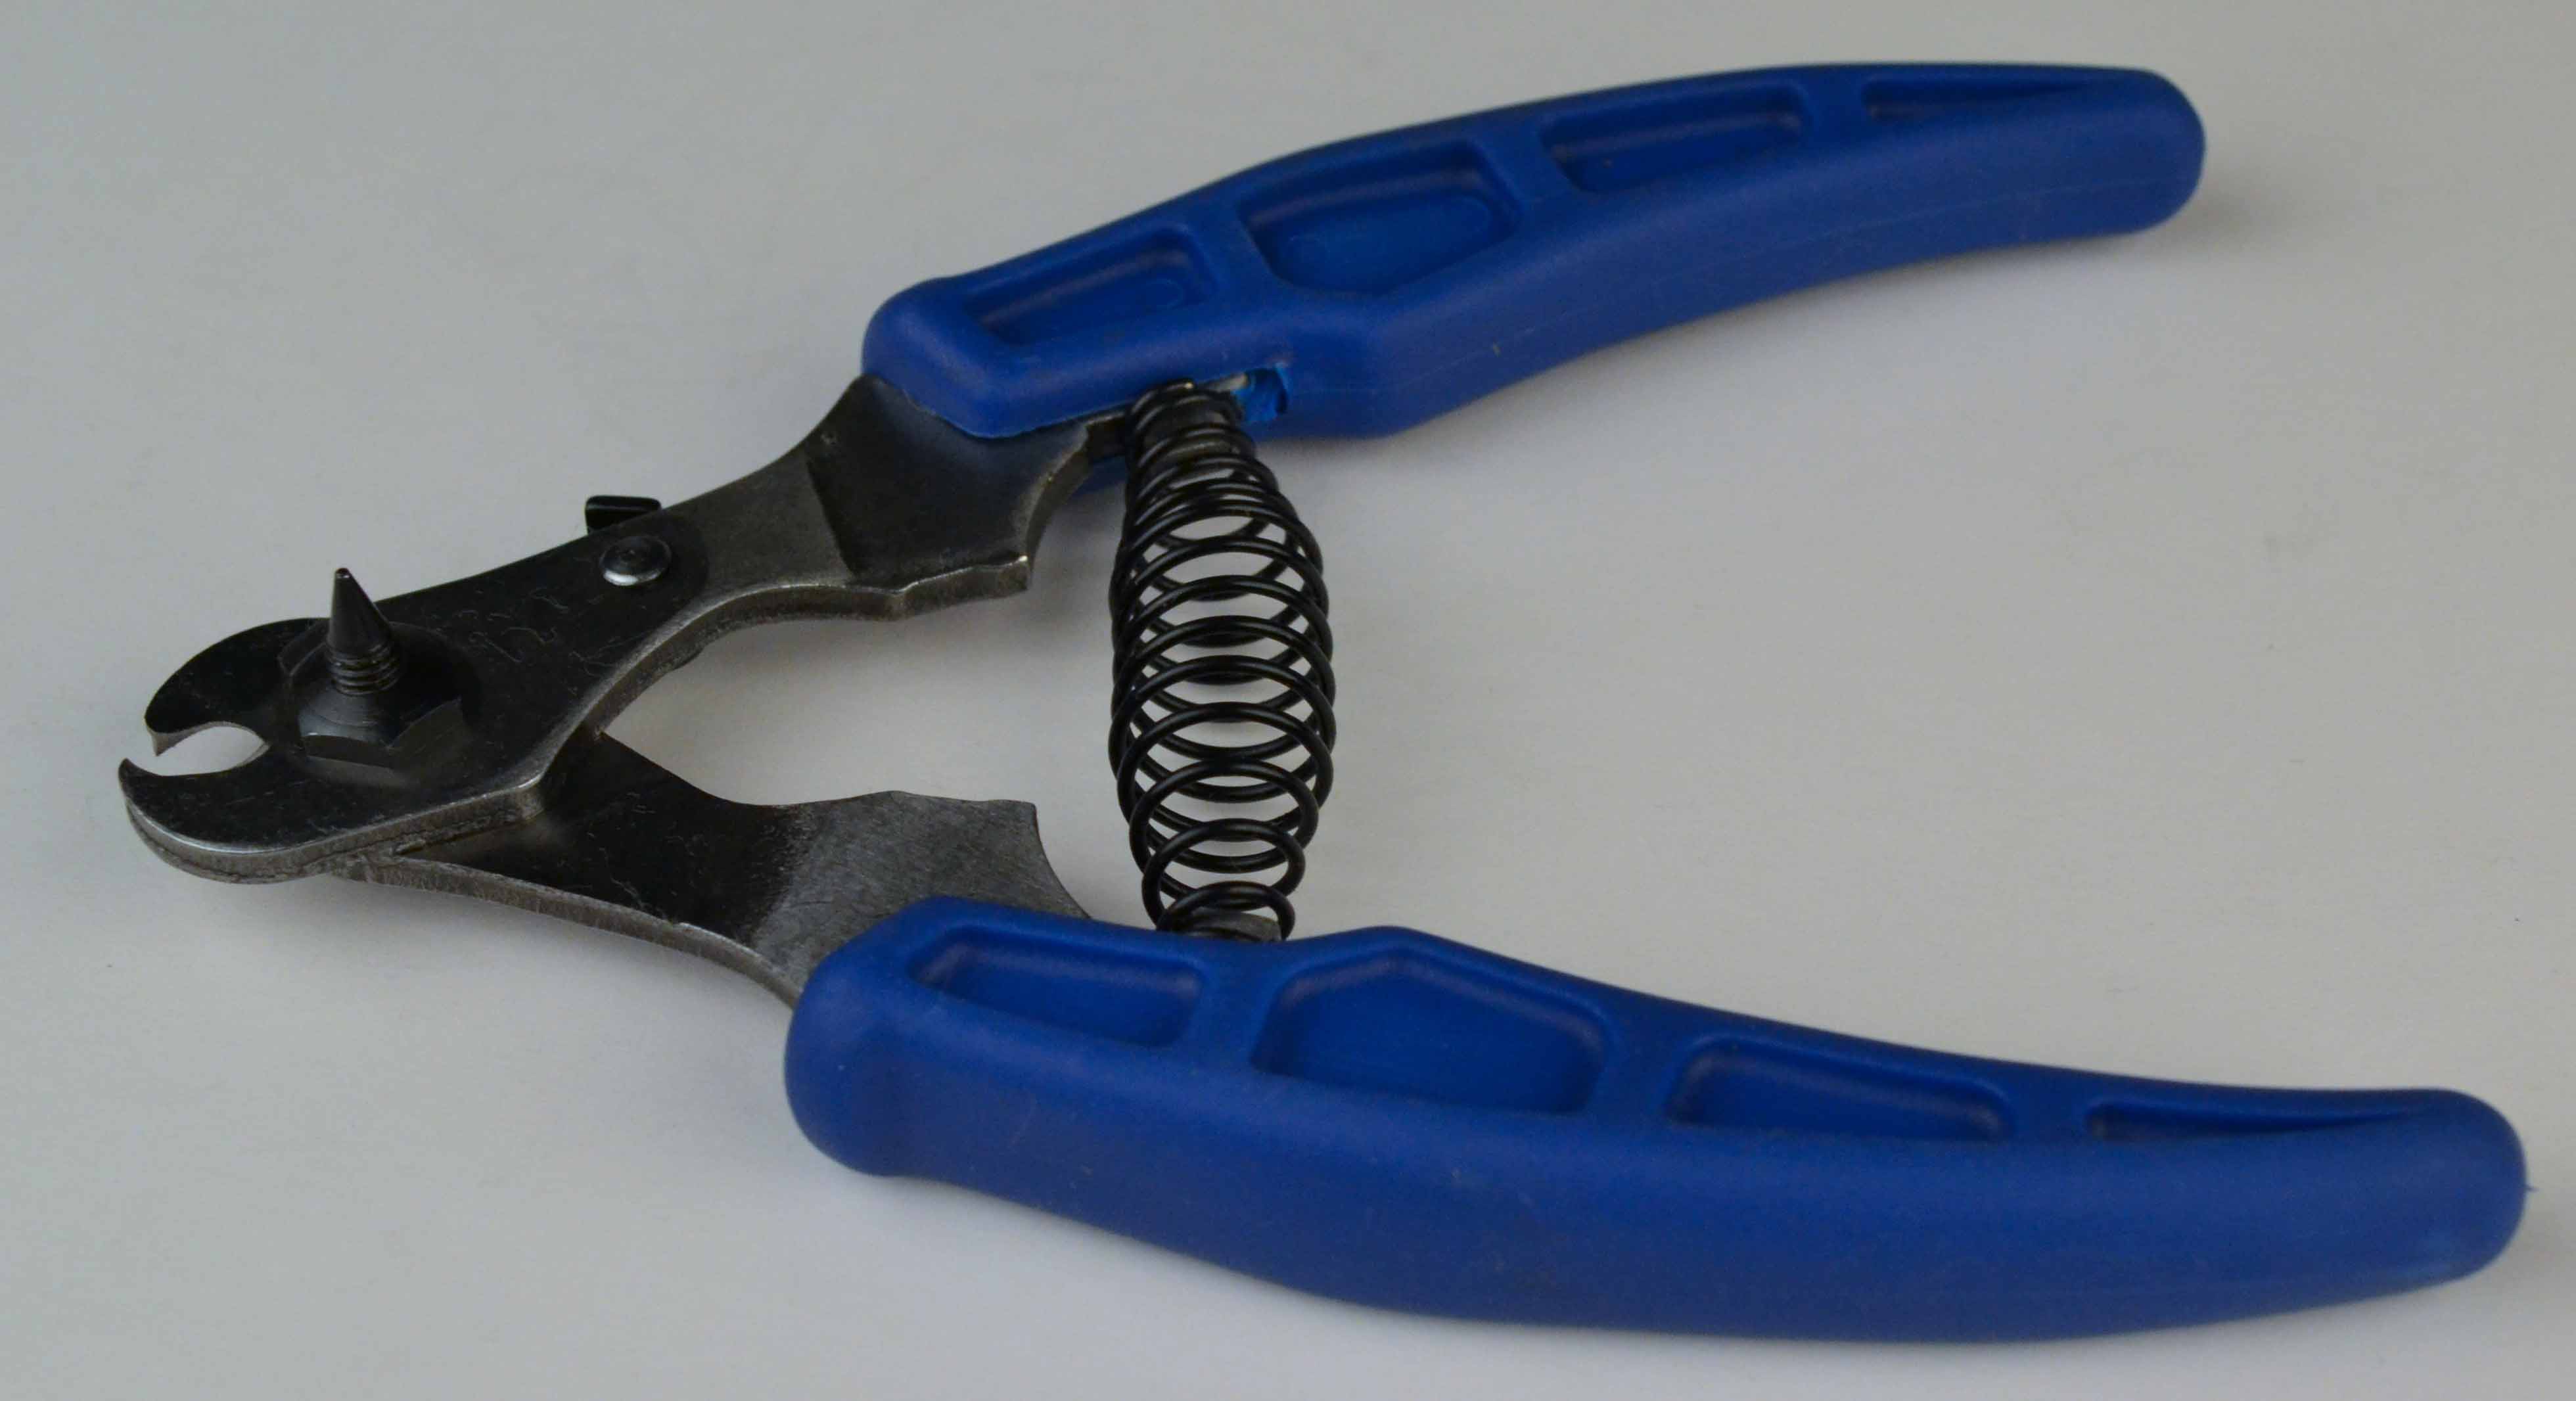 Impurity Cable and Housing Cutter